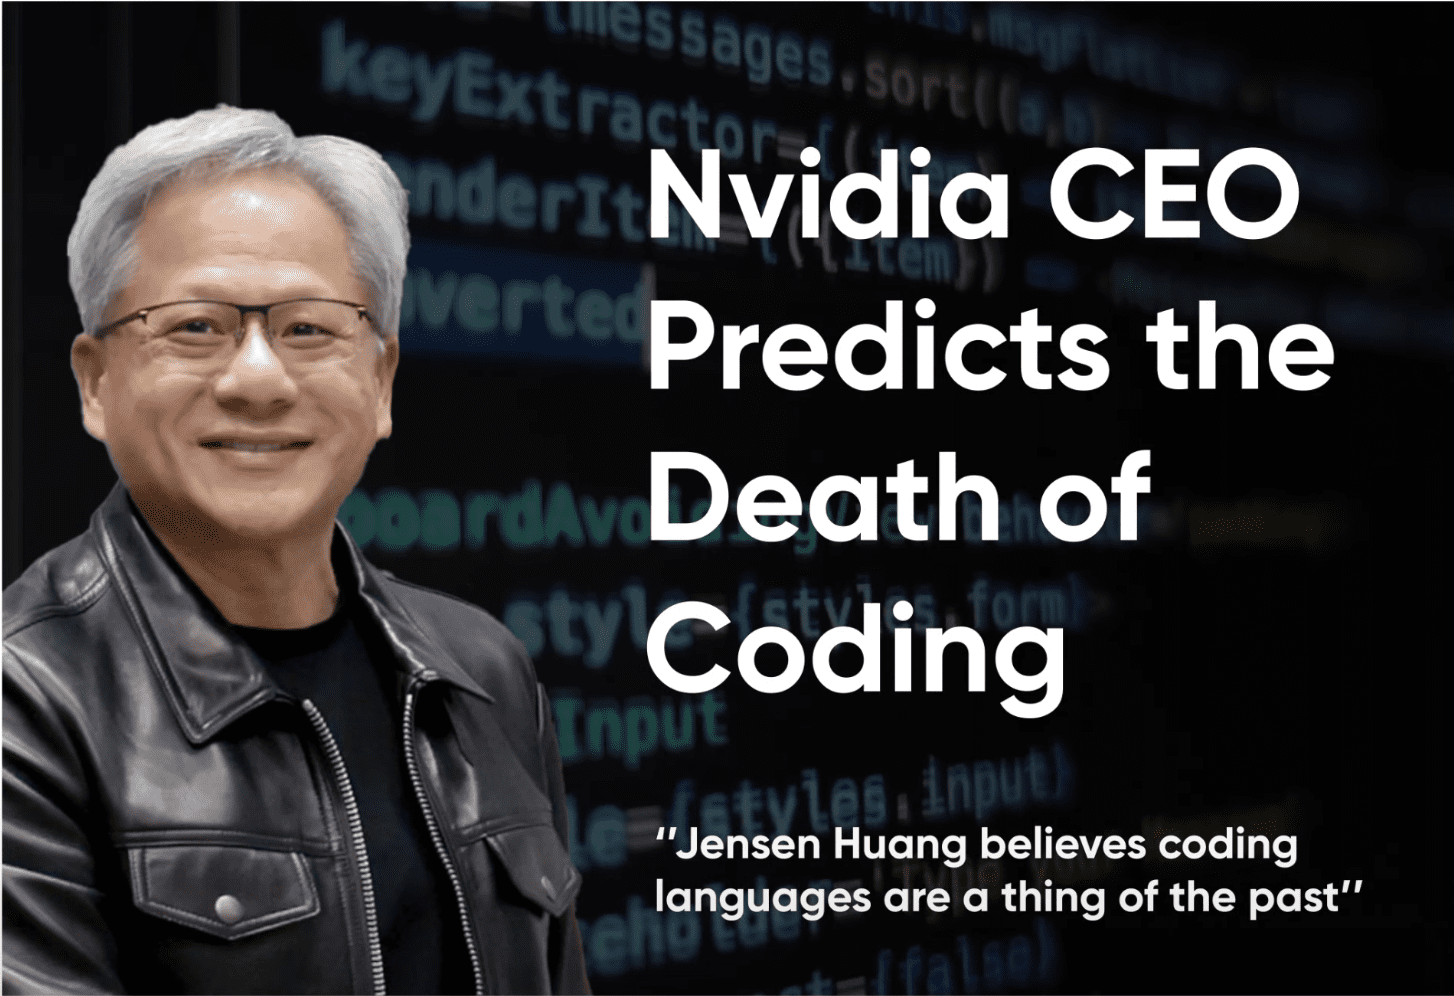 Nvidia CEO Jensen Huang predicts the death of coding